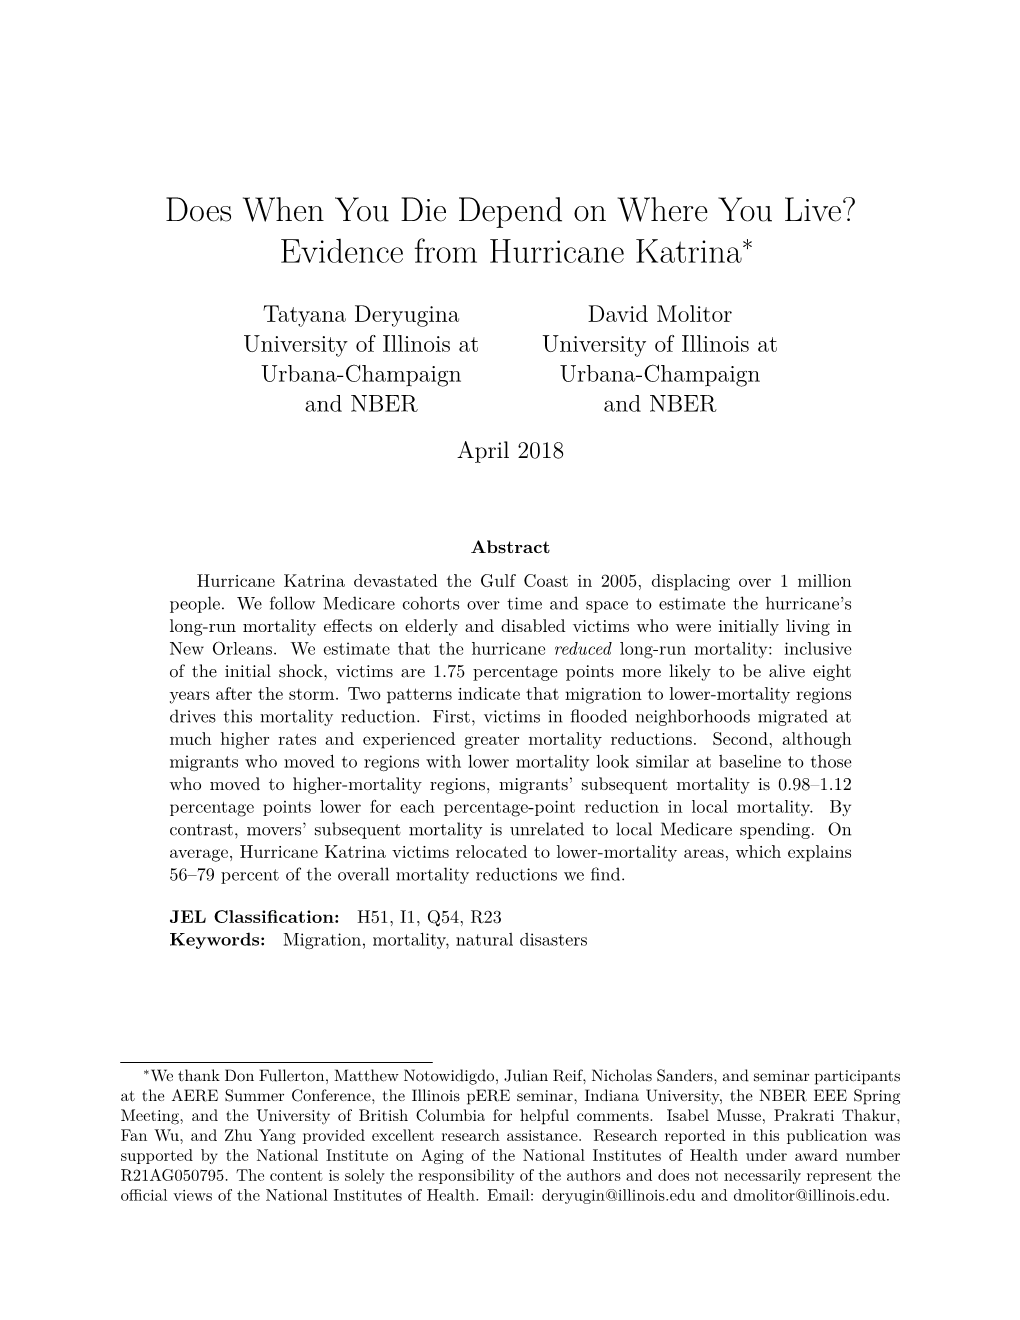 Does When You Die Depend on Where You Live? Evidence from Hurricane Katrina∗